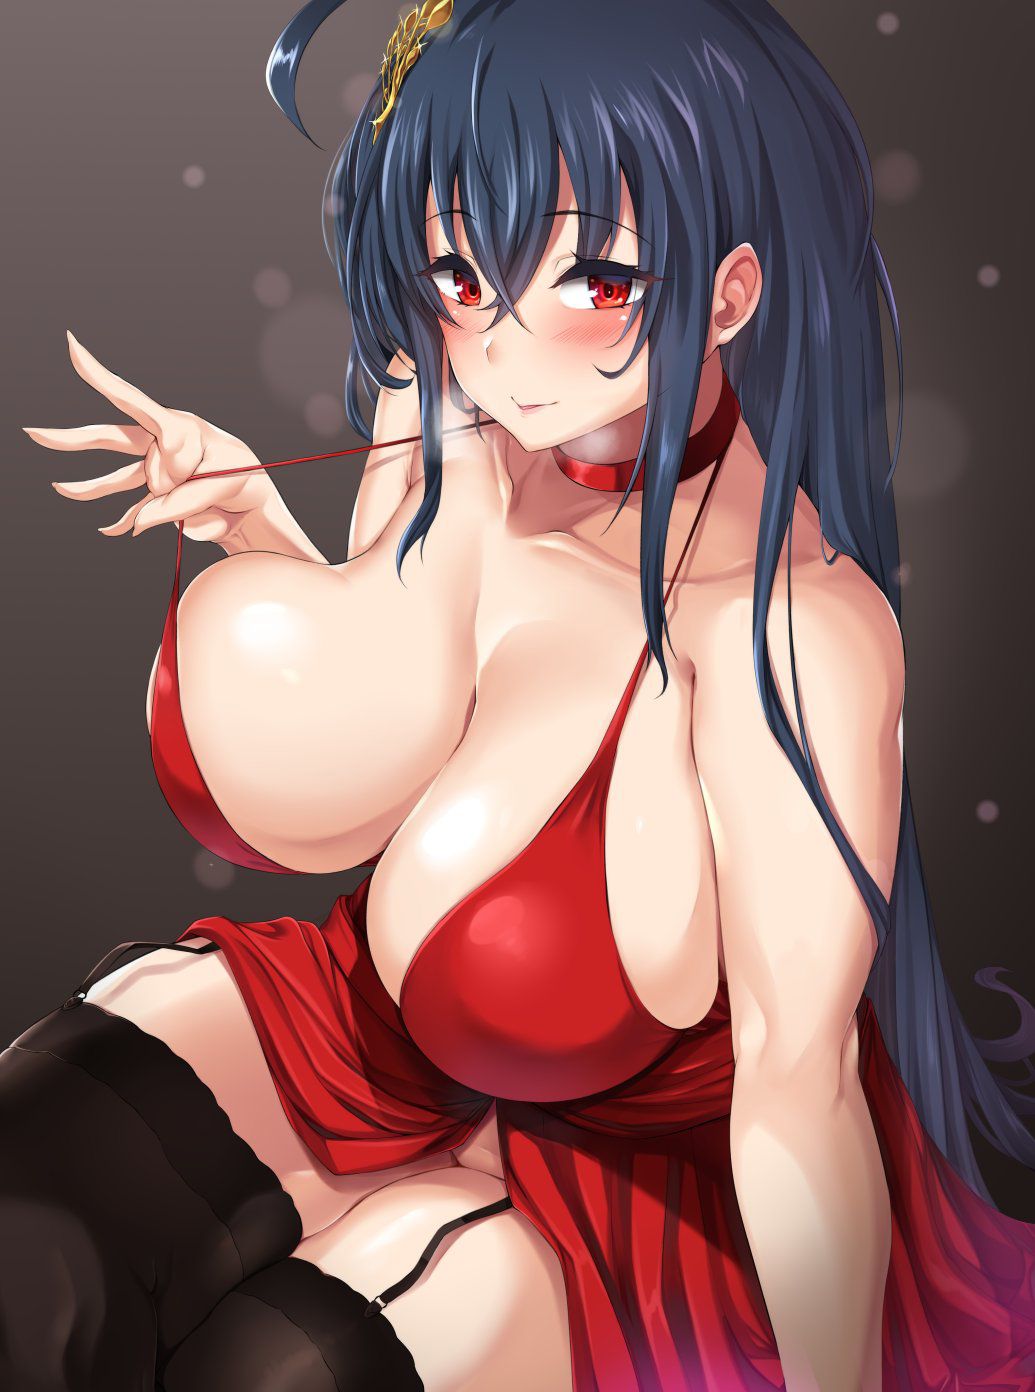 [2nd] Second erotic image of a plump plump girl. 11 [plump] 27